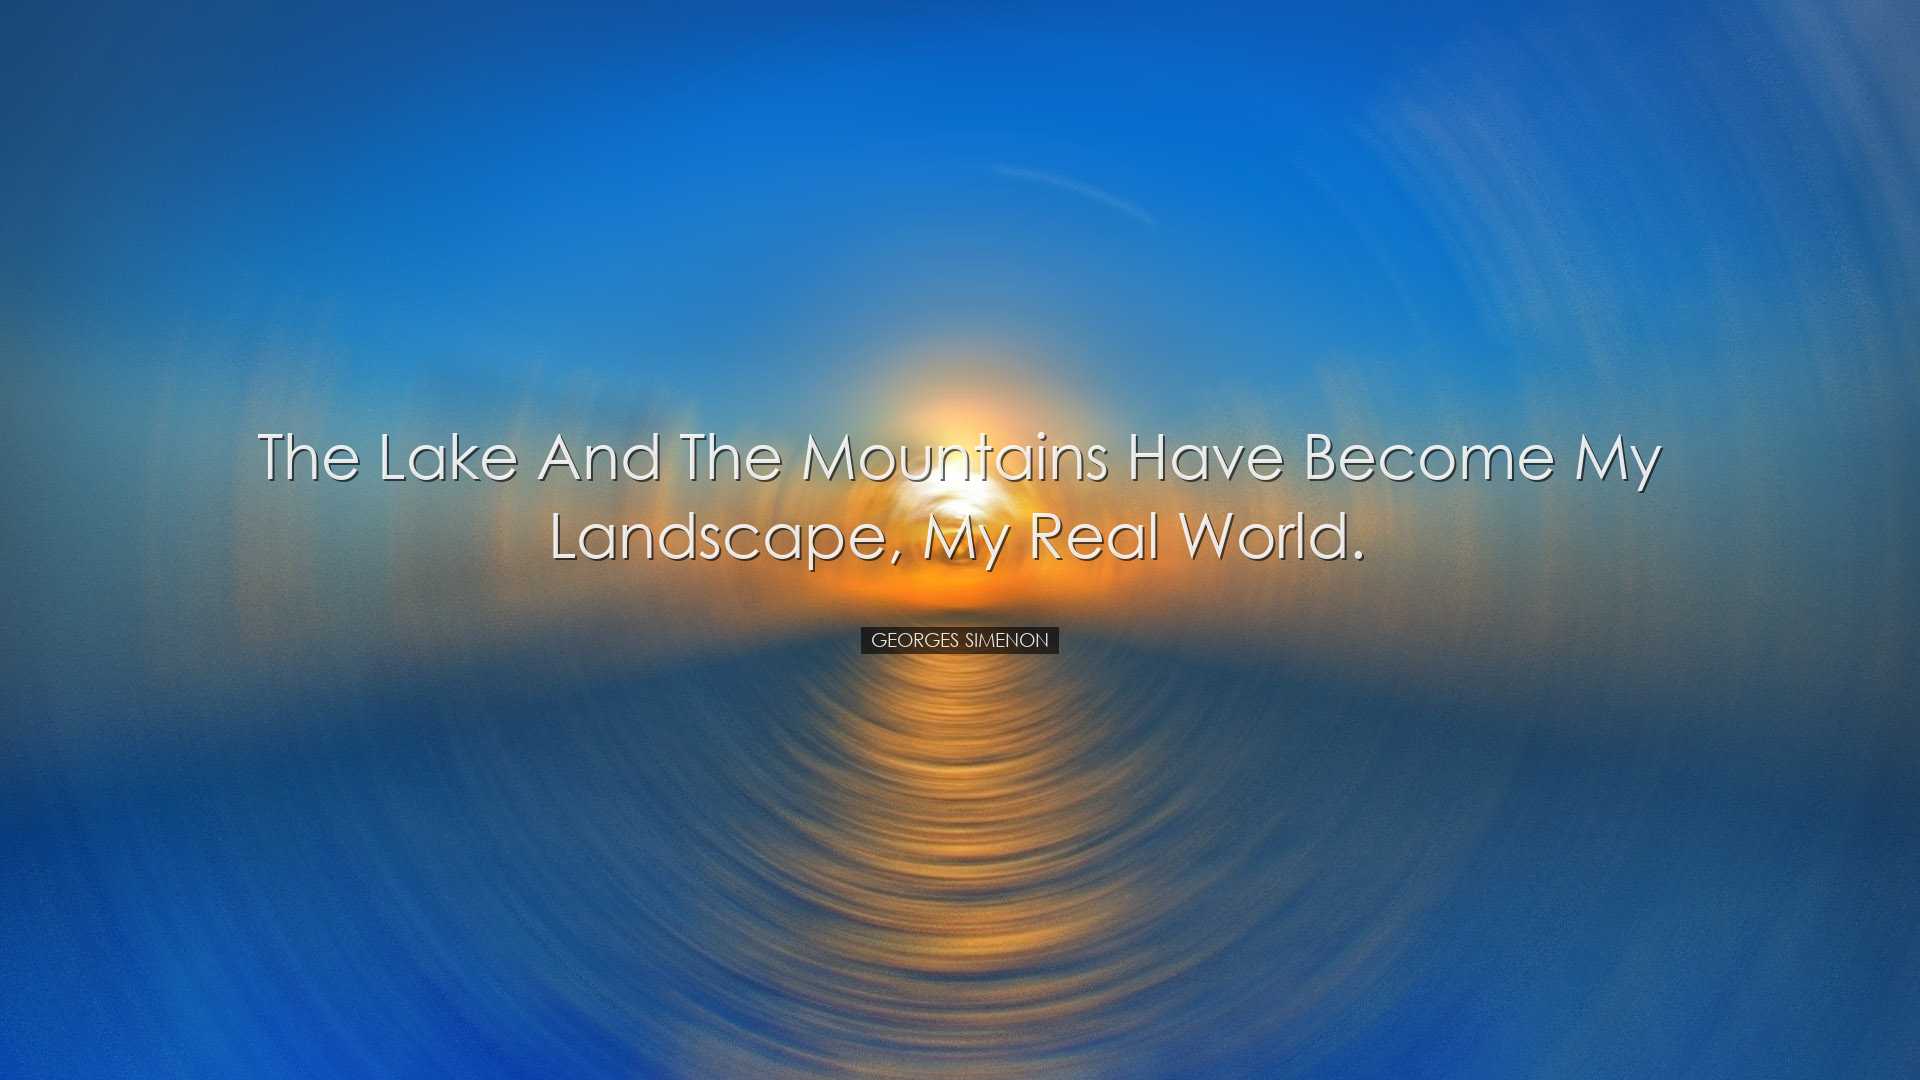 The lake and the mountains have become my landscape, my real world